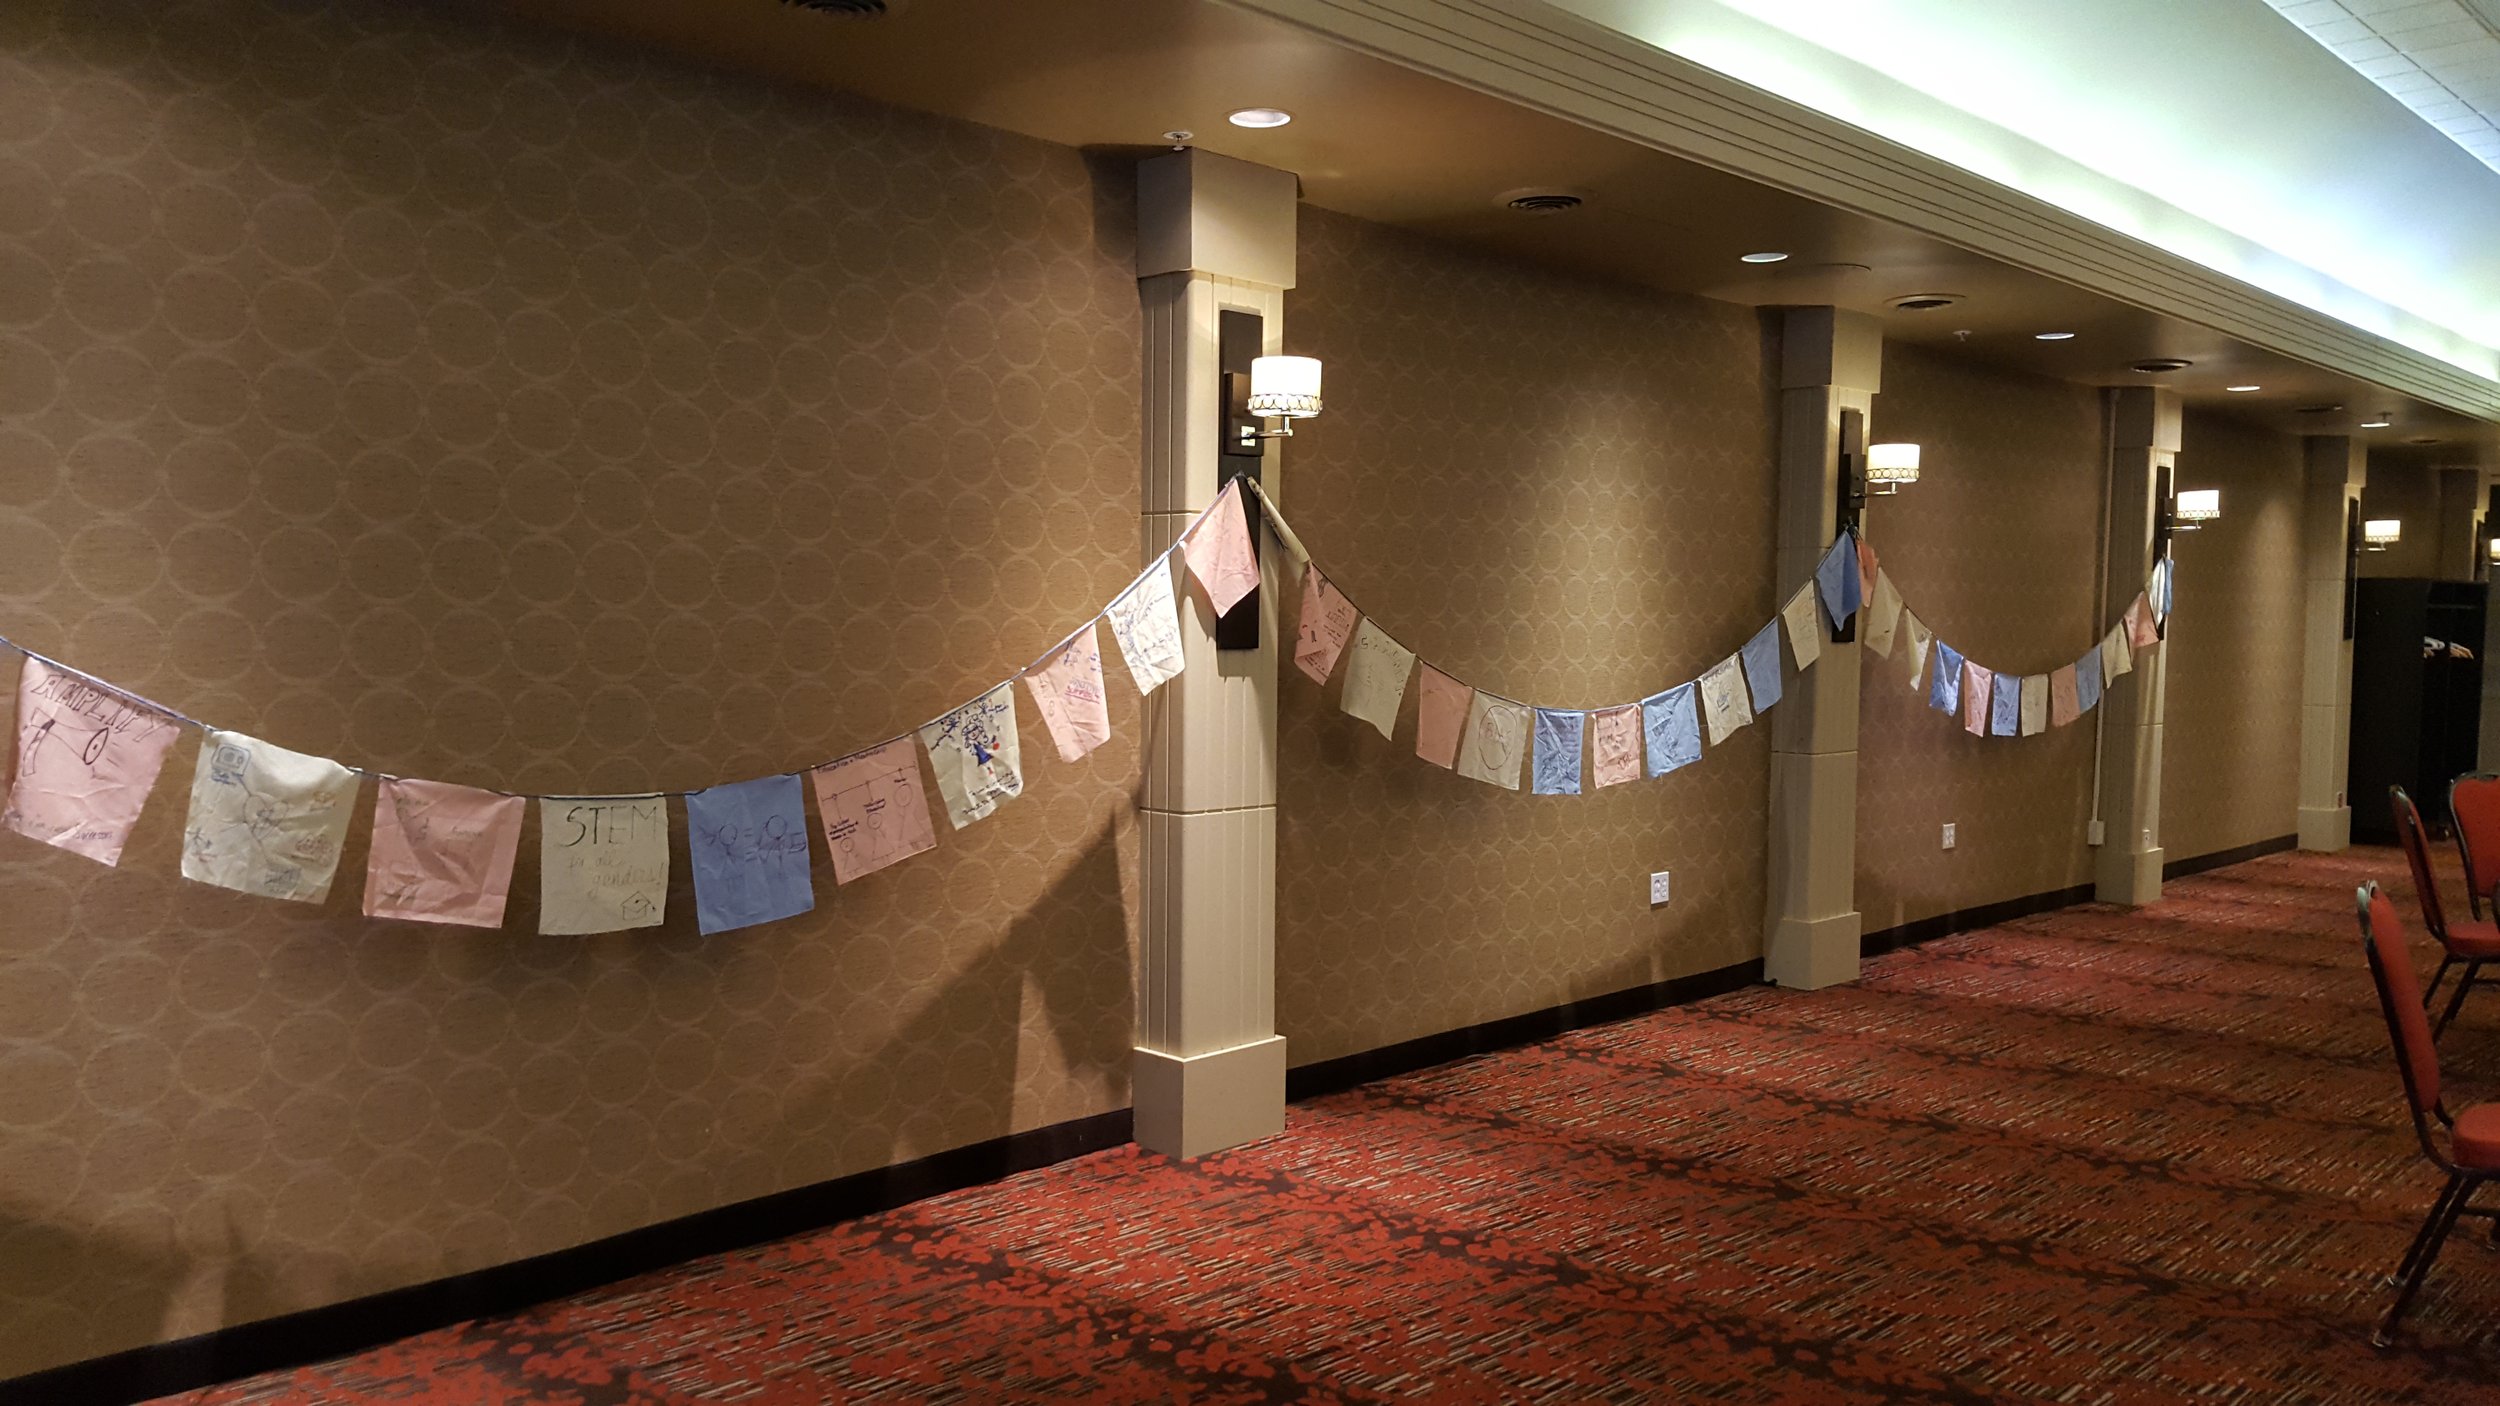  Image is of sheets of paper hanging by a string going from wall to wall in a “u” shape. The pieces of paper of the ideas from the Community Conversation written on them. 